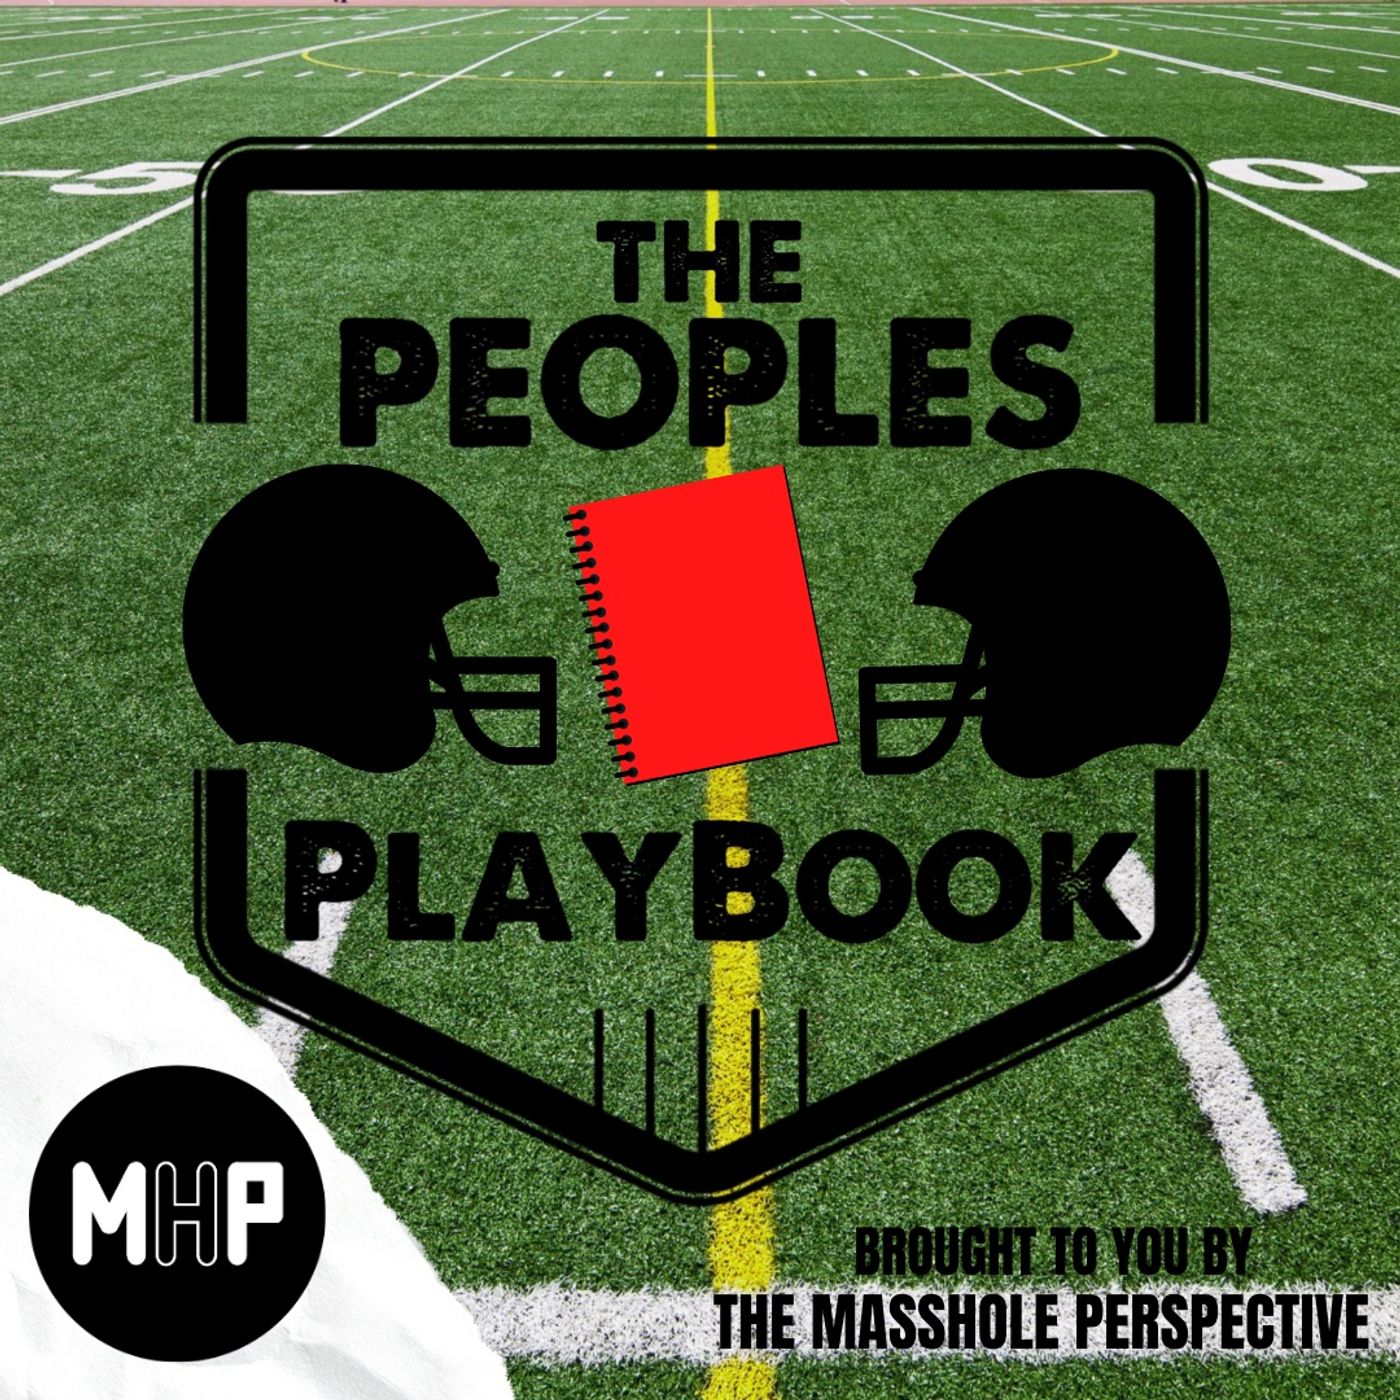 The People's Playbook